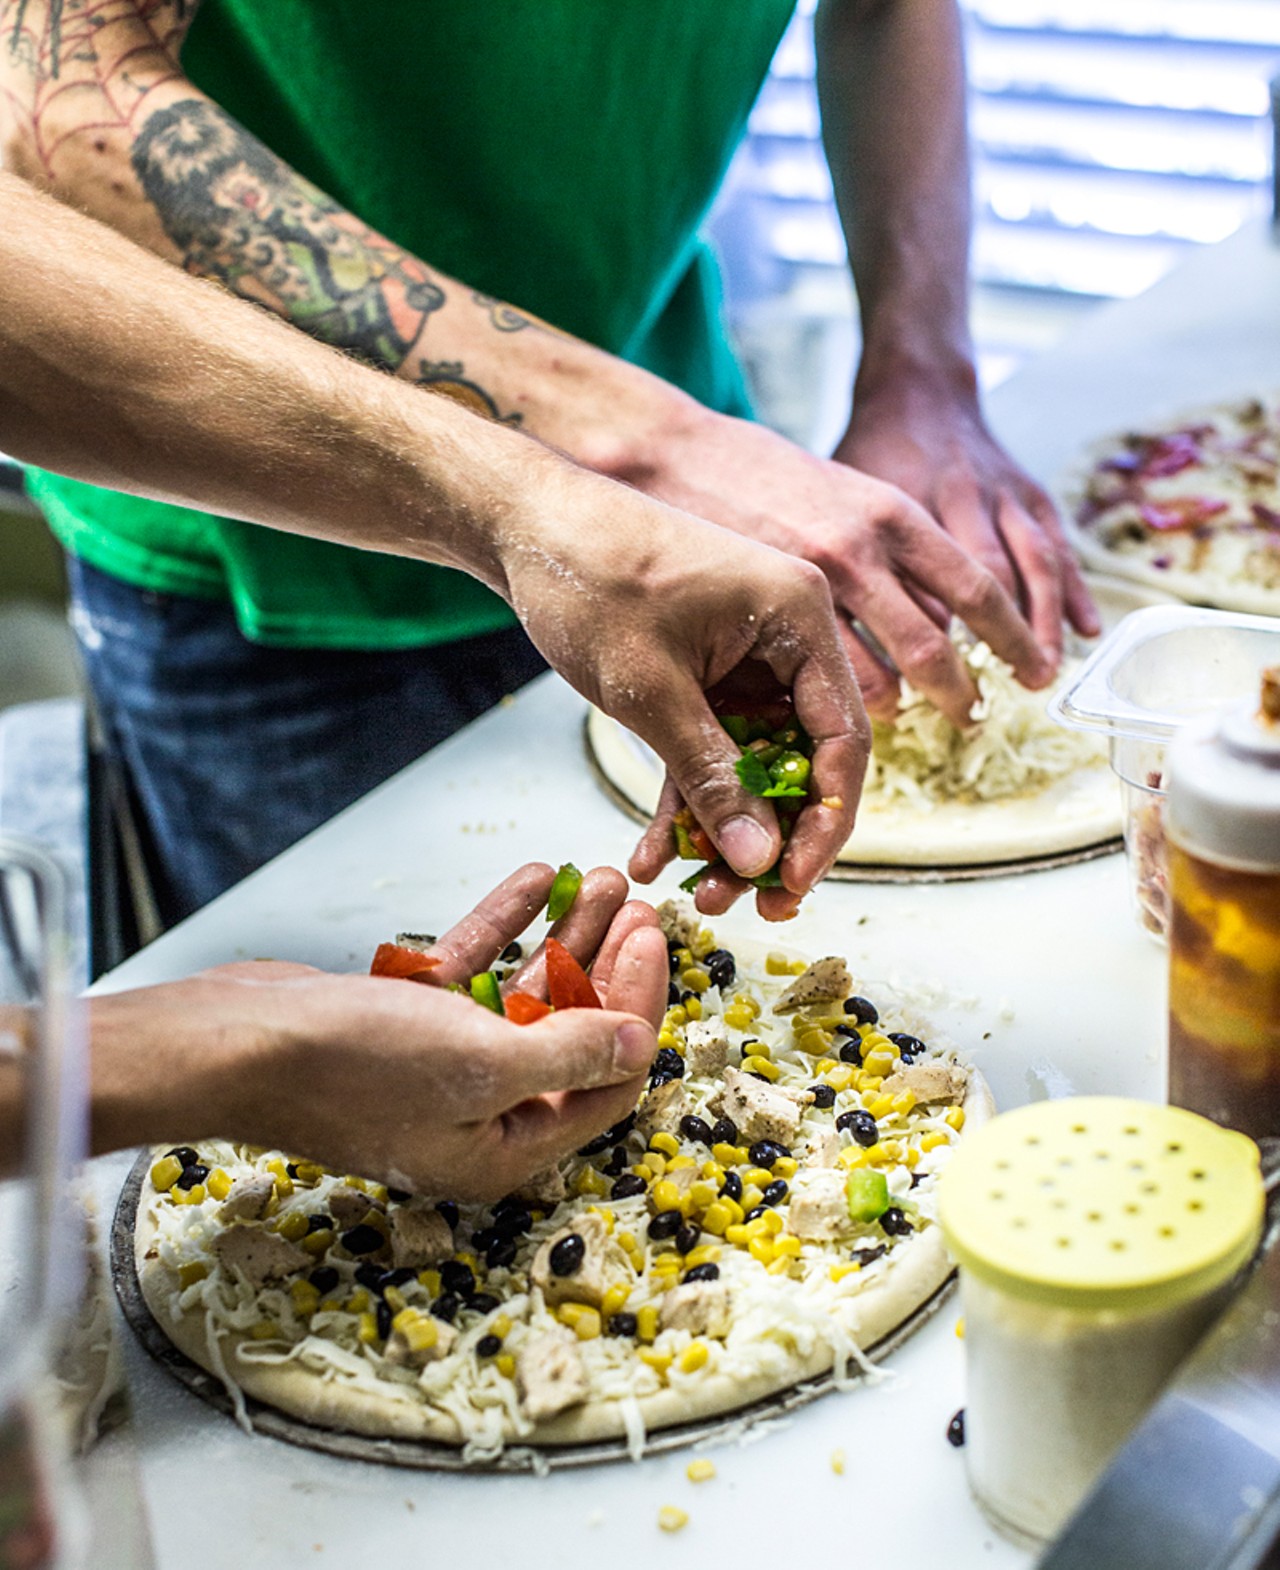 The "Lime Street" pizza is prepared using salsa chicken, roasted corn and black beans, mozzarella, fresh jalapenos, cilantro and a spicy sriracha drizzle.